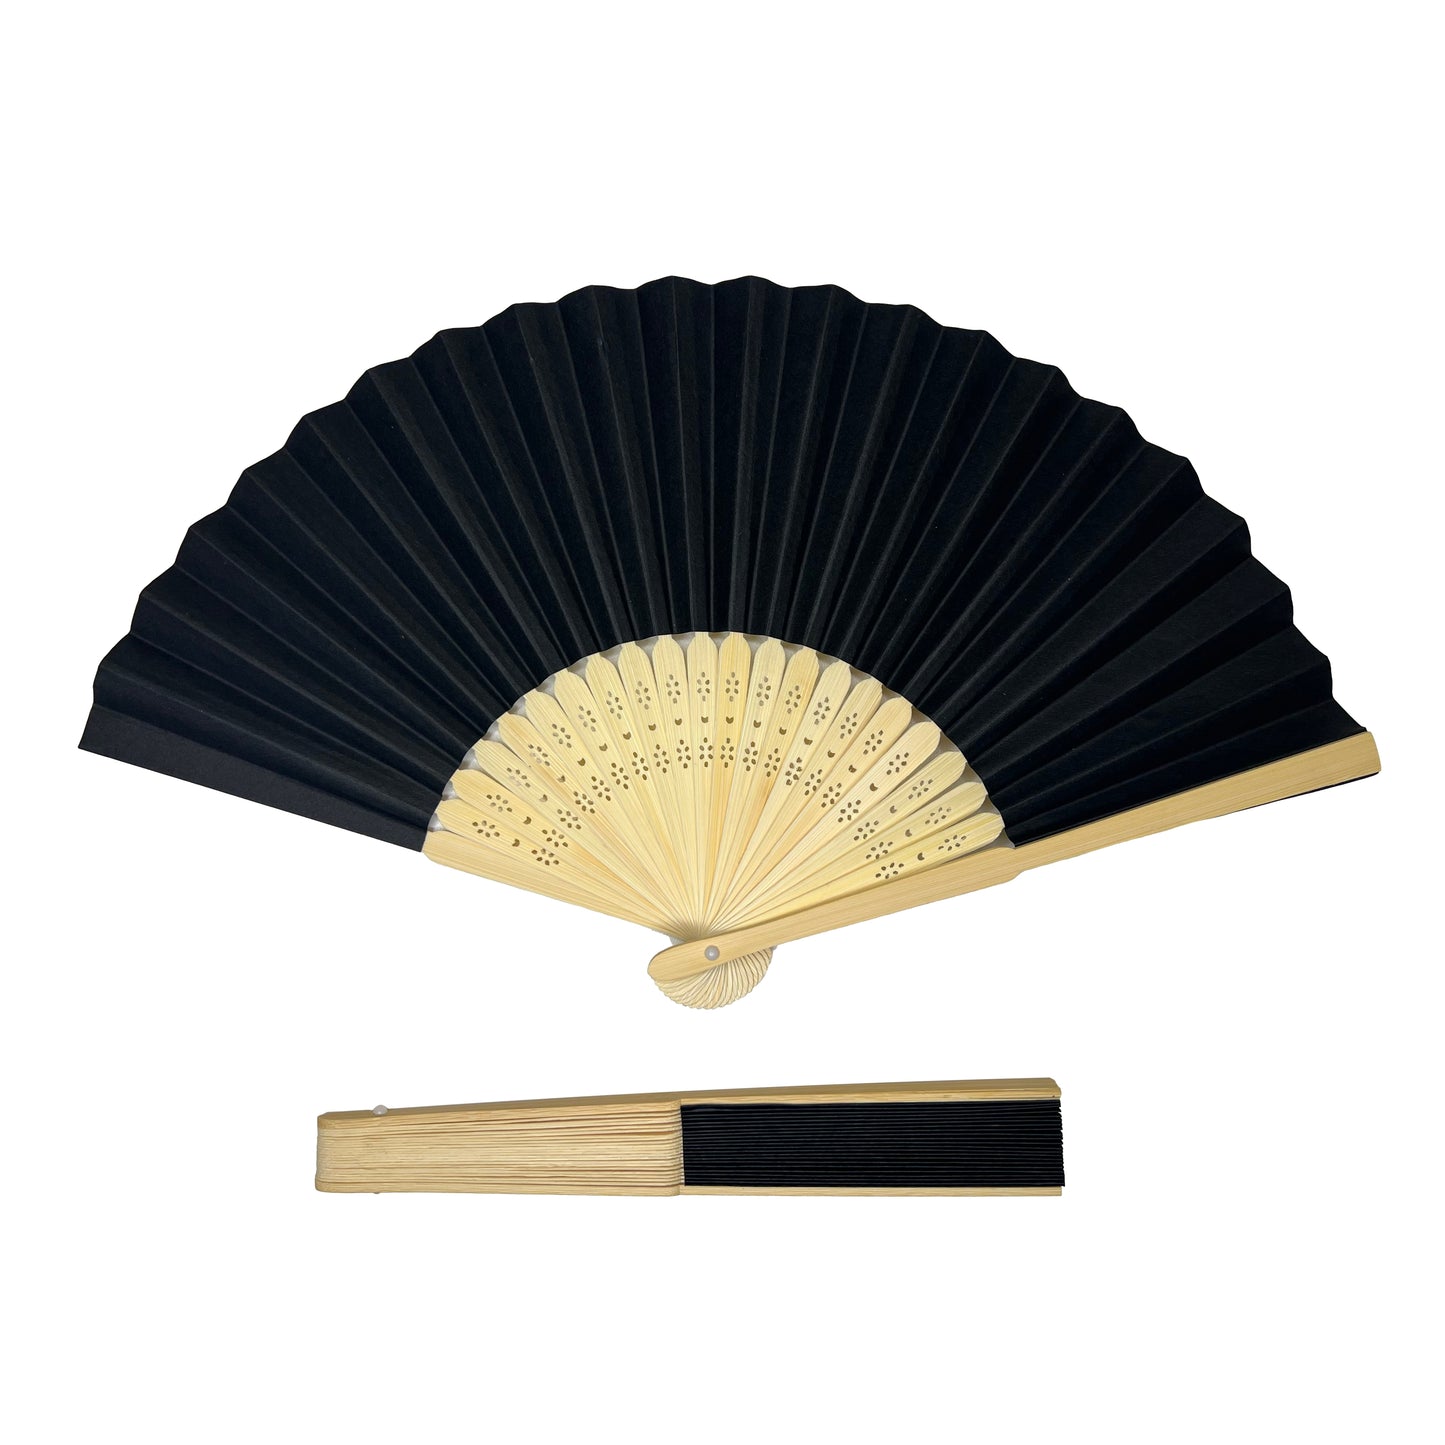 Pack of 500 Black Paper Foldable Hand Held Bamboo Wooden Fans by Parev